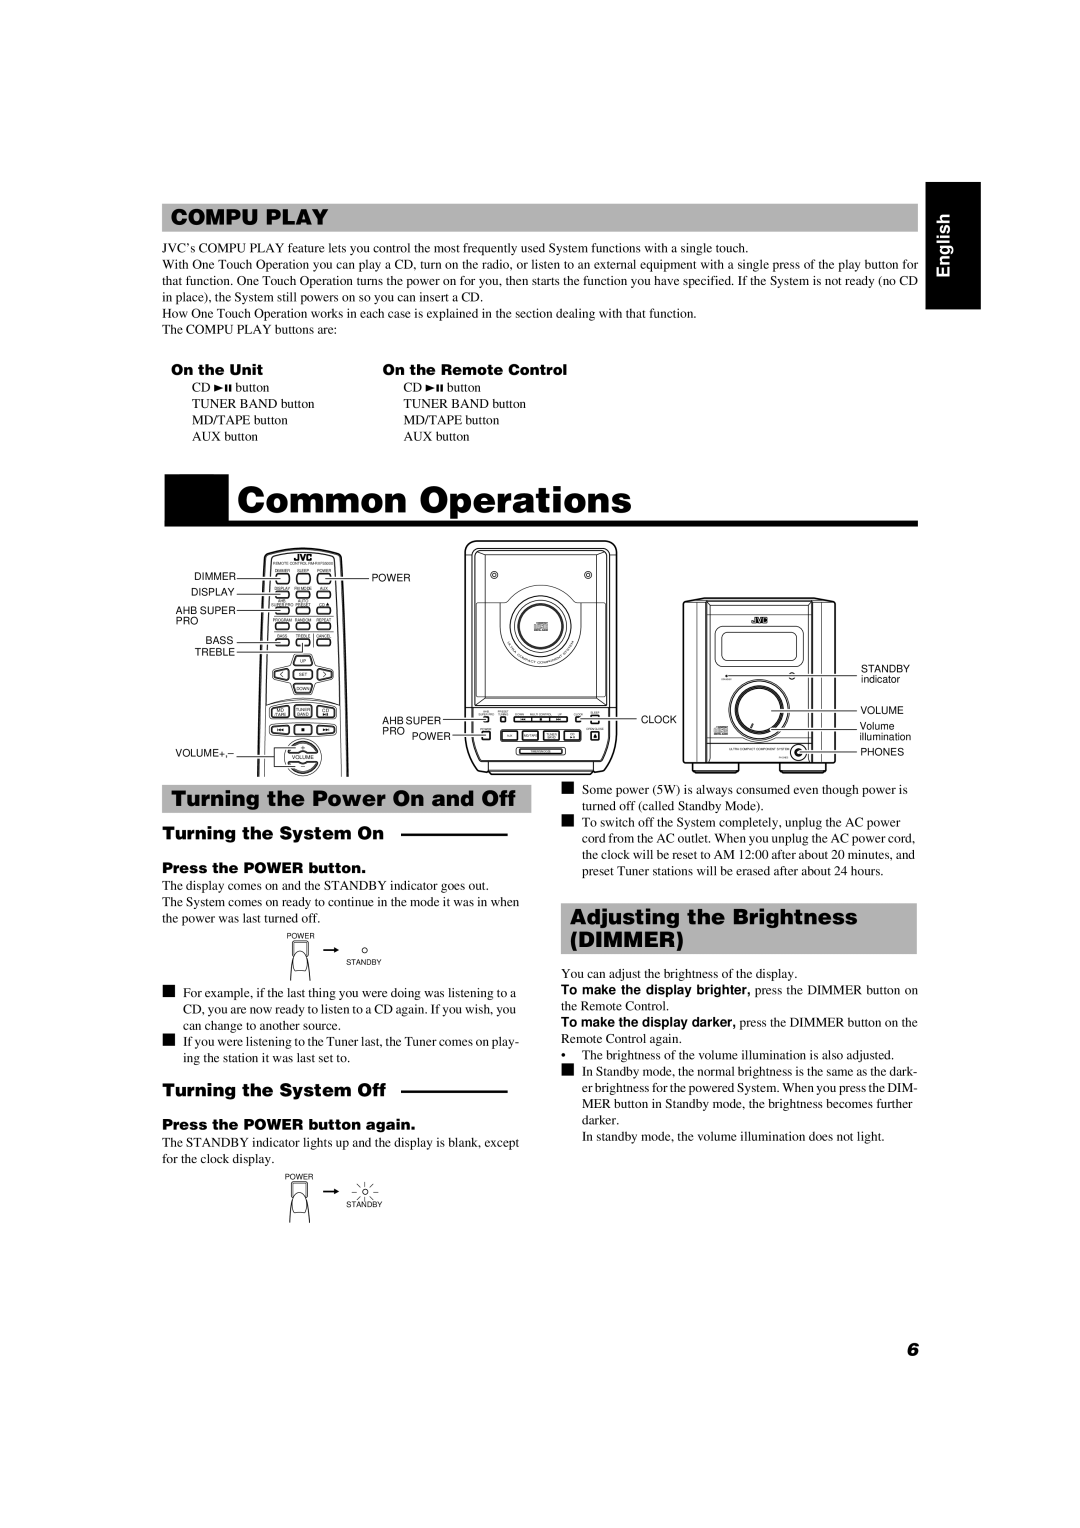 JVC FS-5000 manual Common Operations, Turning the Power On and Off, Adjusting the Brightness Dimmer, Turning the System On 